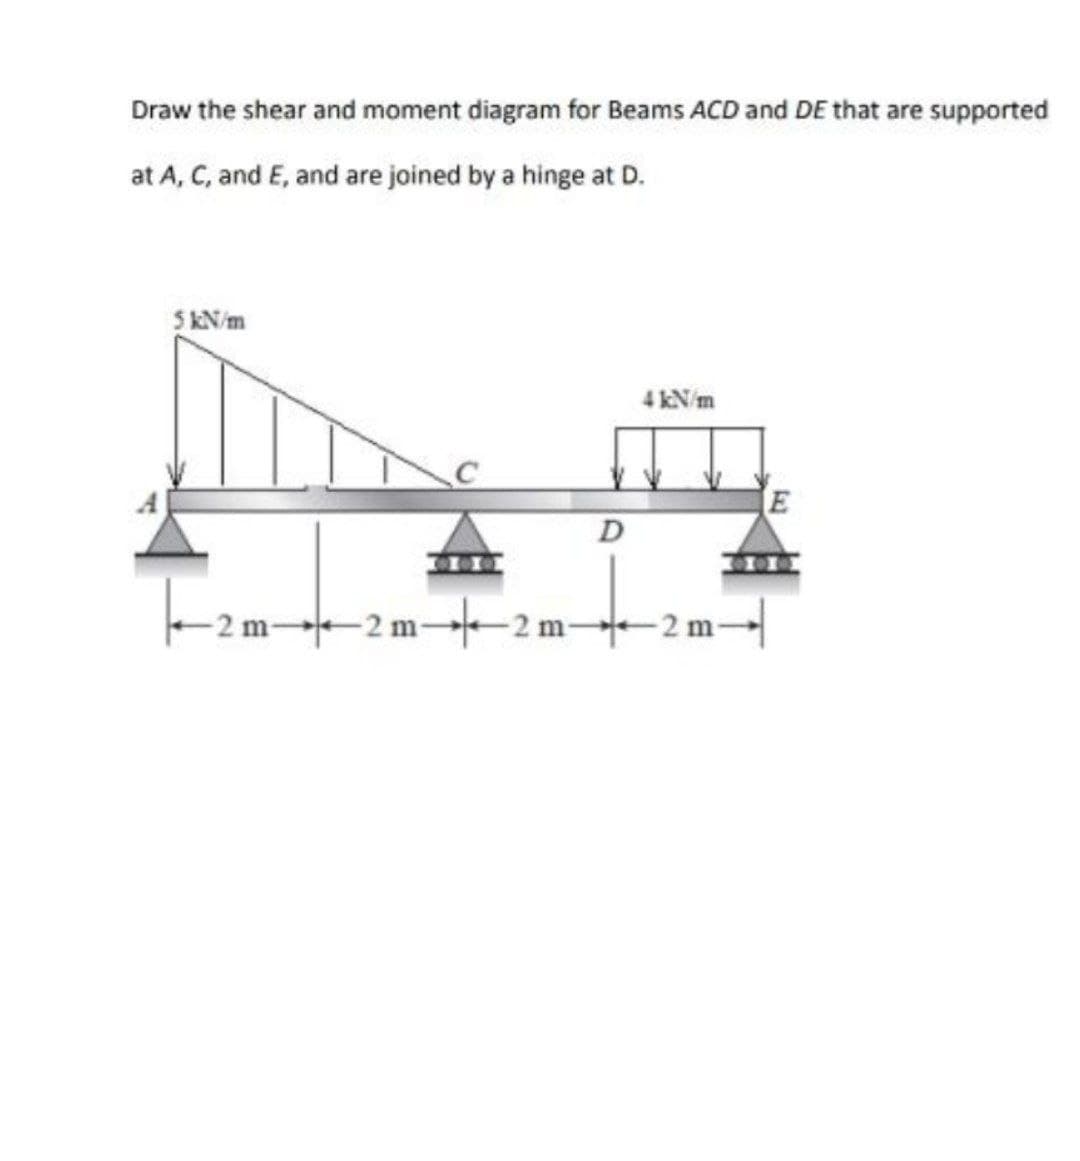 Draw the shear and moment diagram for Beams ACD and DE that are supported
at A, C, and E, and are joined by a hinge at D.
5kN/m
4 kN/m
E
D
-2 m 2 m -2m 2 m→
